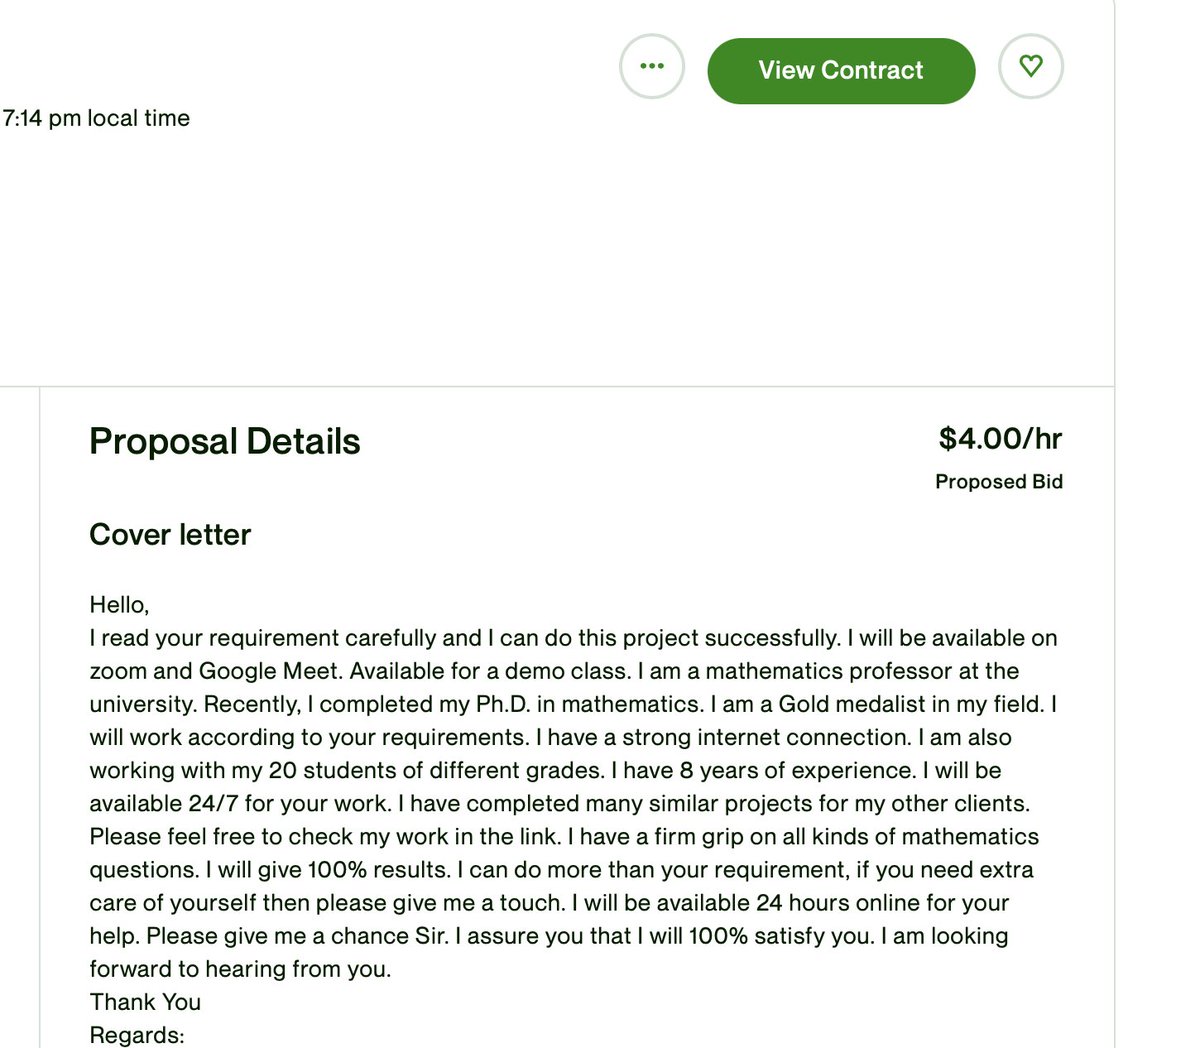 Last night my 12 year old was struggling with Algebra, so I immediately posted a job for a tutor on Upwork.

Literally 10 minutes later we were Zooming with a PhD professor in Pakistan for $4/hour. 

She whipped him into shape & will help him 5 hours/week now.

Impatience can be…